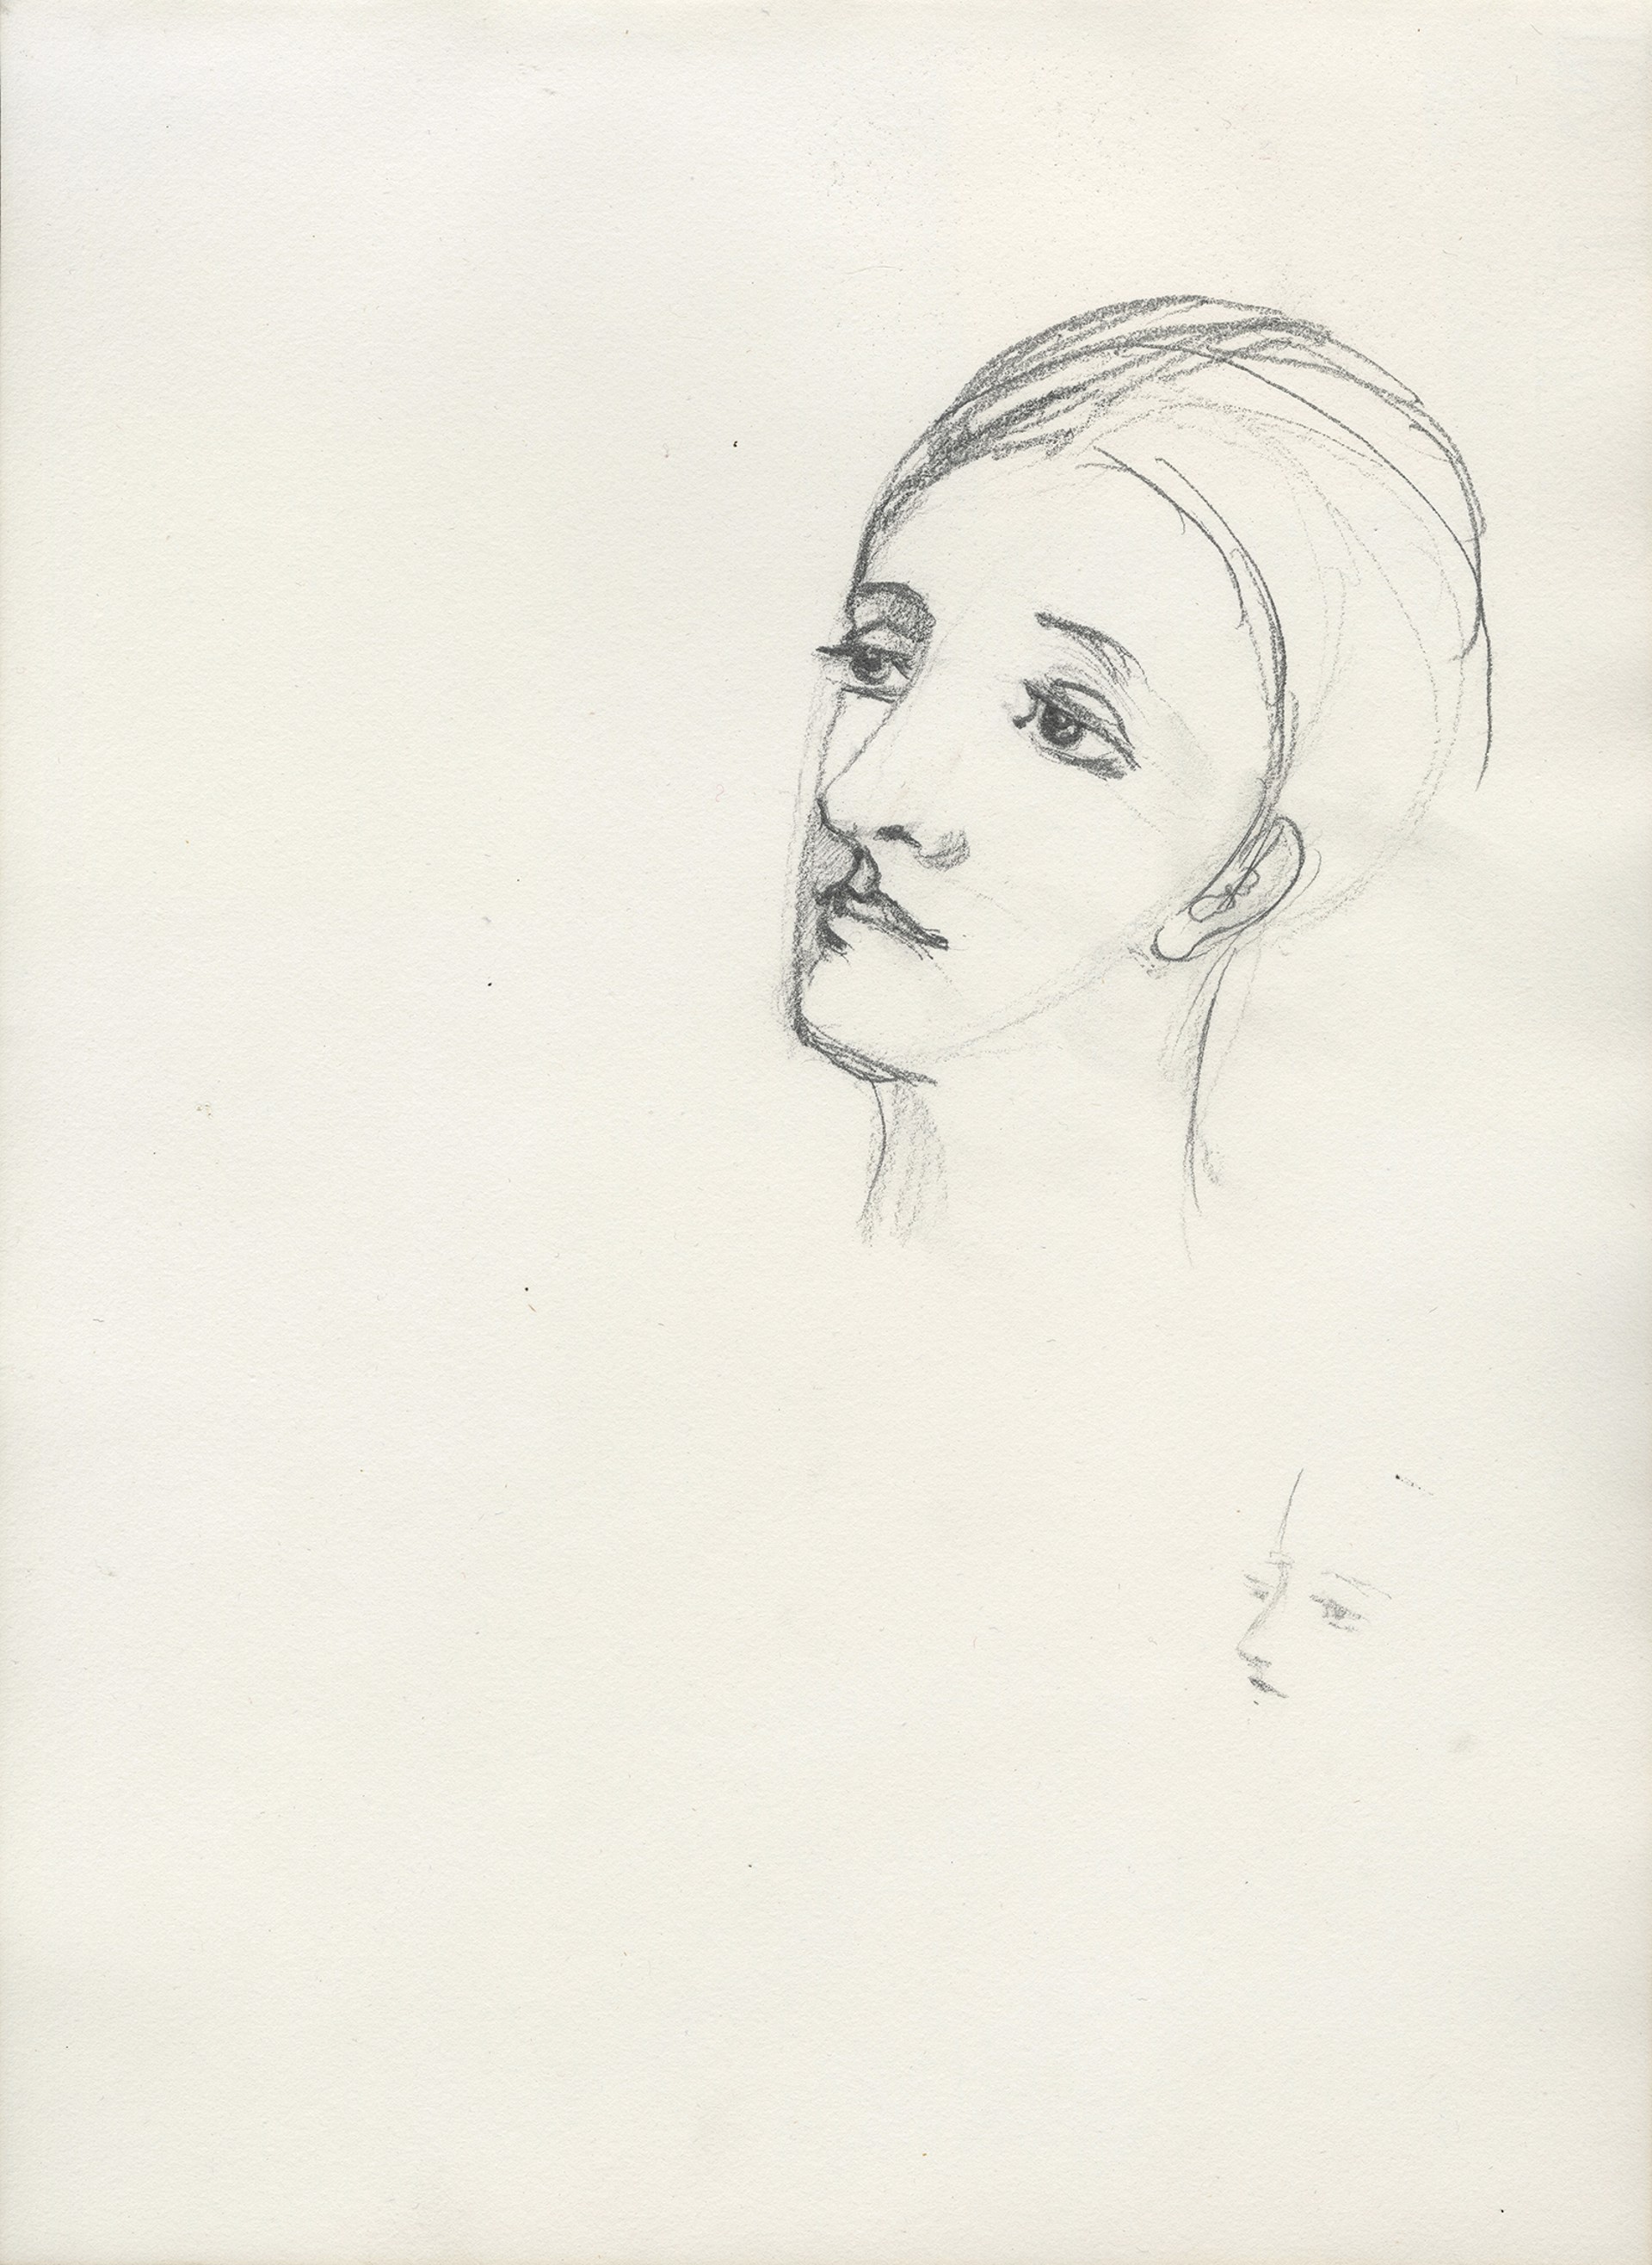 Two Studies of a Woman's Face by Hannah de Rothschild